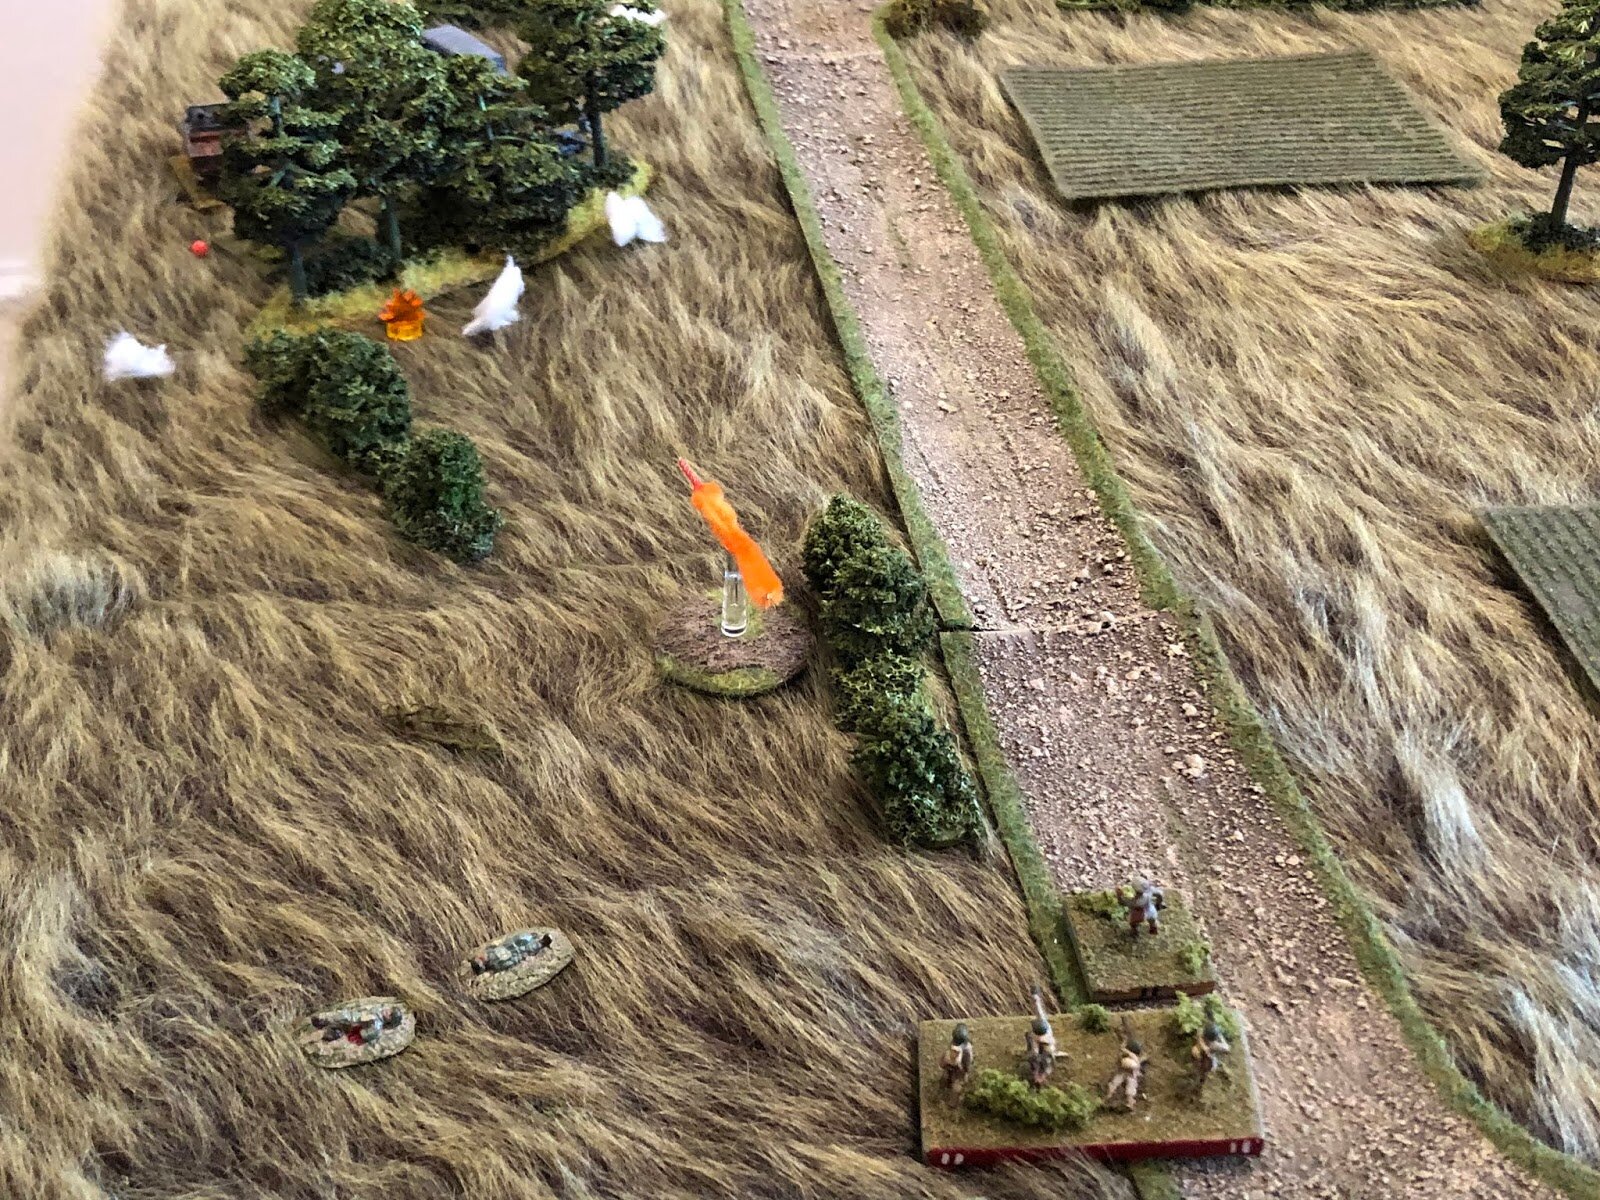  2nd Platoon opens fire on the German ATG position, no effect.  